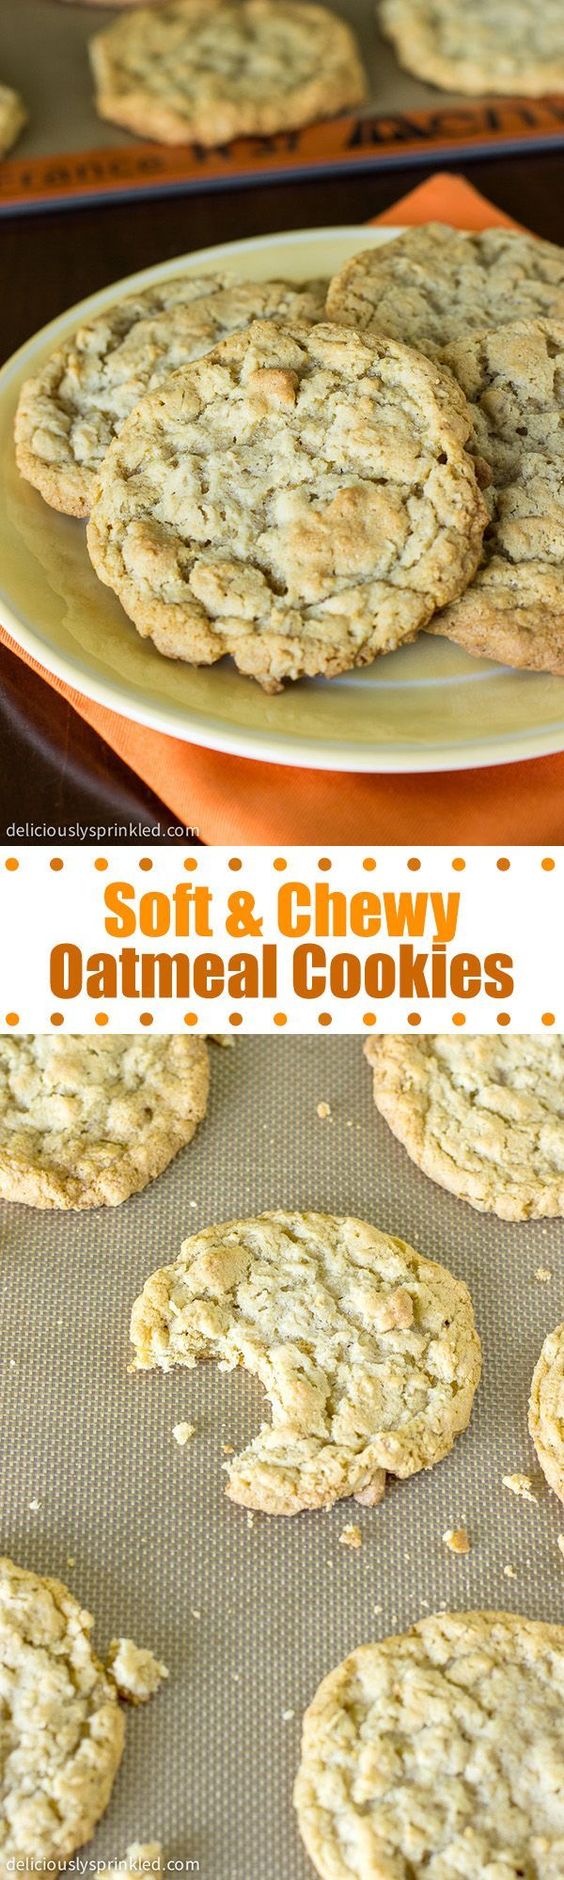 THE BEST OATMEAL COOKIES RECIPE